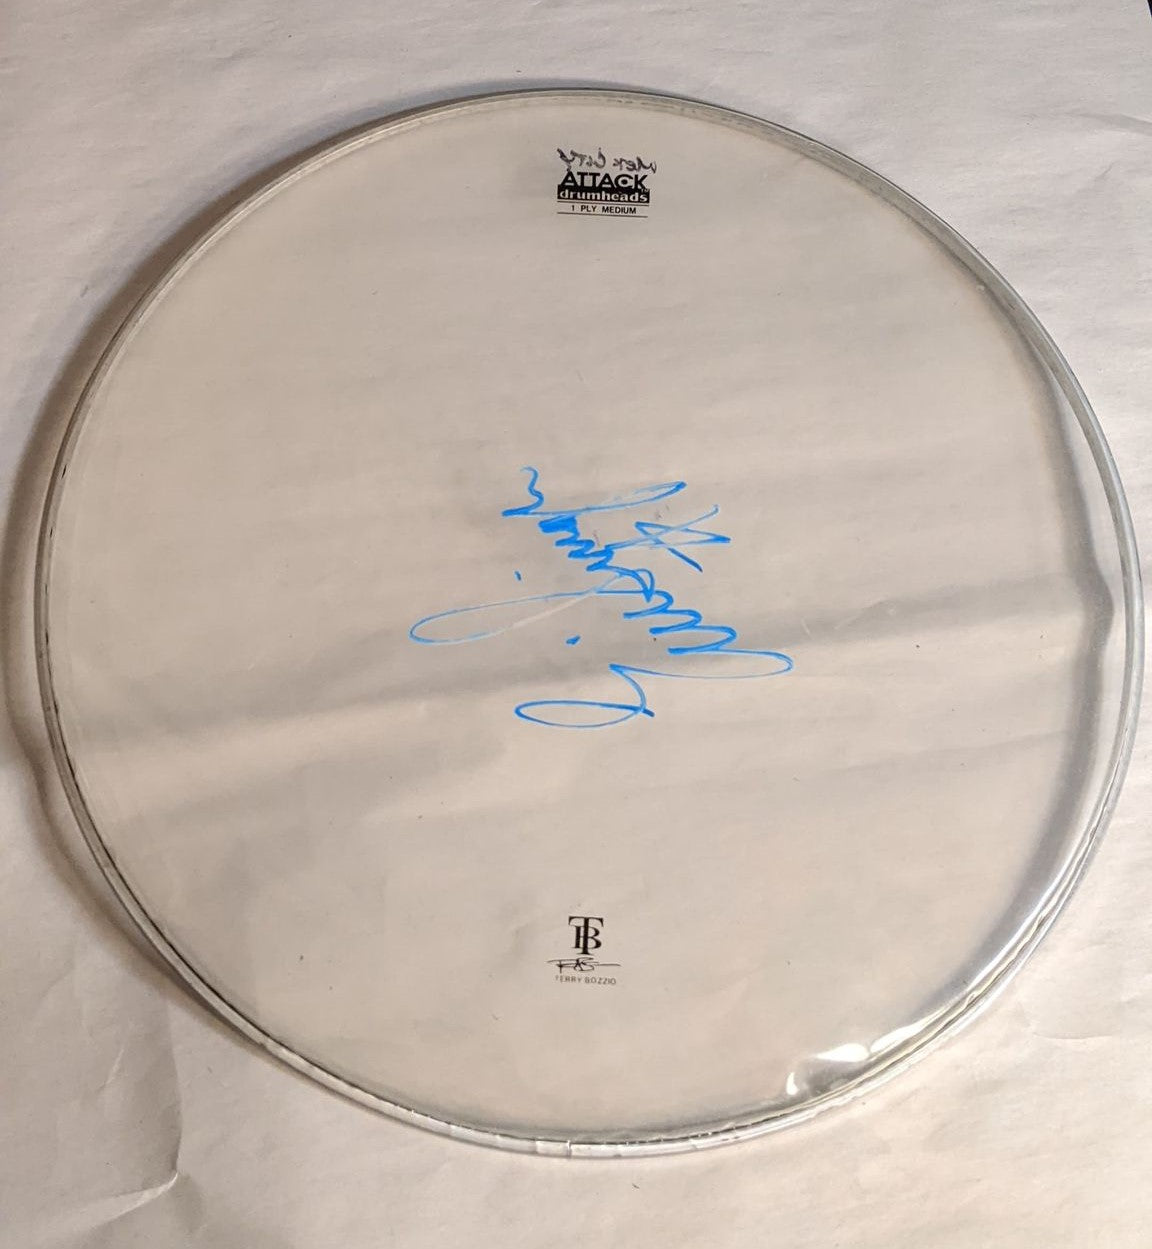 MEXICO CITY 9-29-2012 ERIC SINGER Stage-Used Signed drumheads